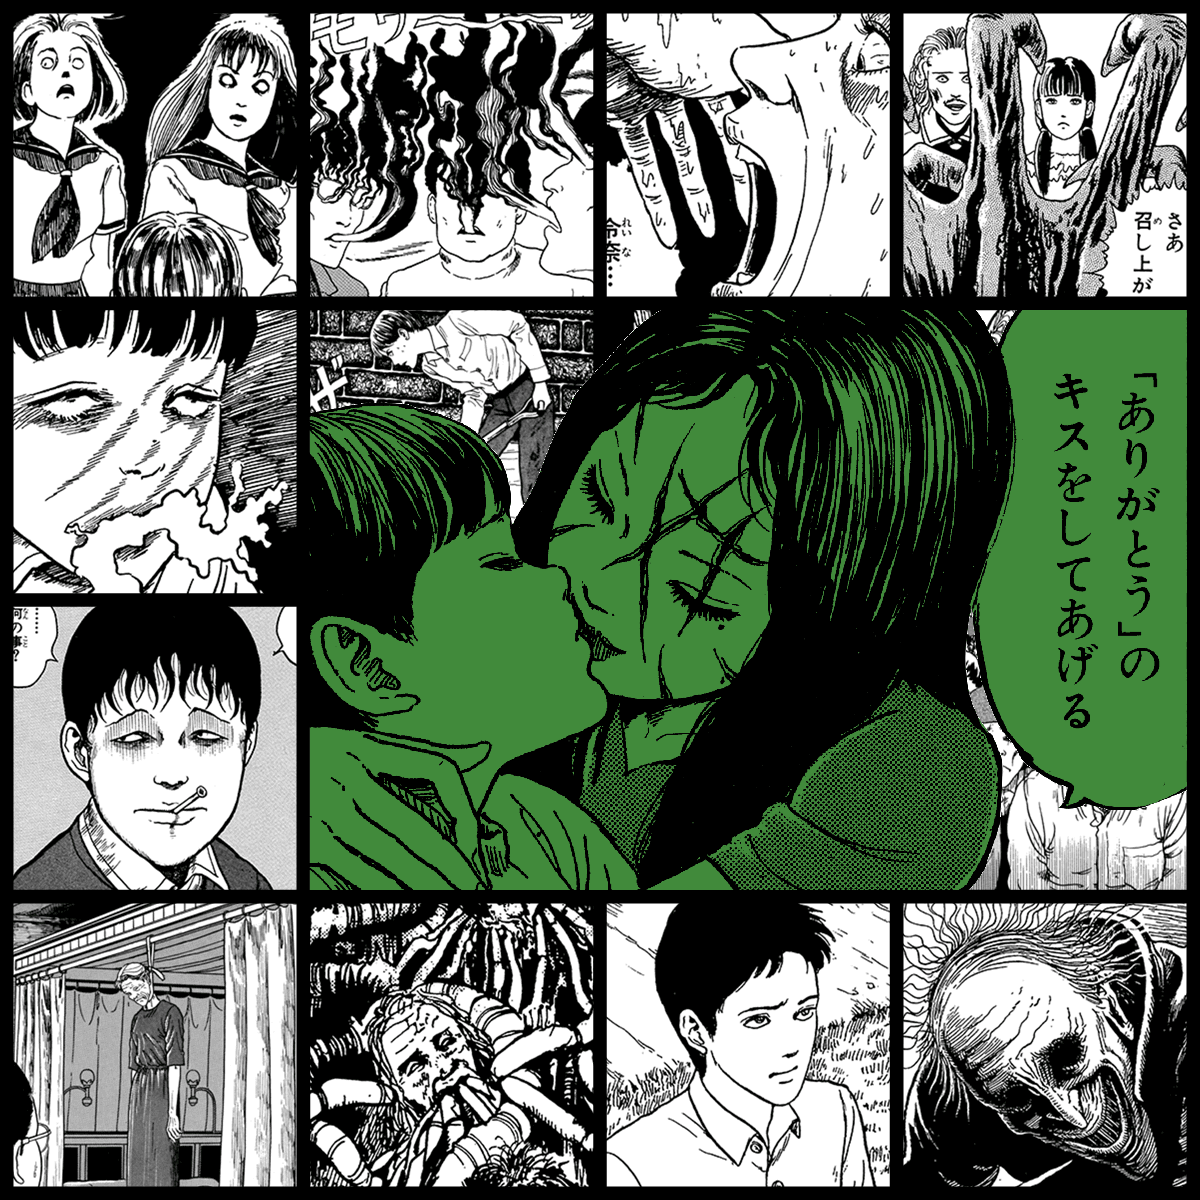 TOMIE by Junji Ito #1274